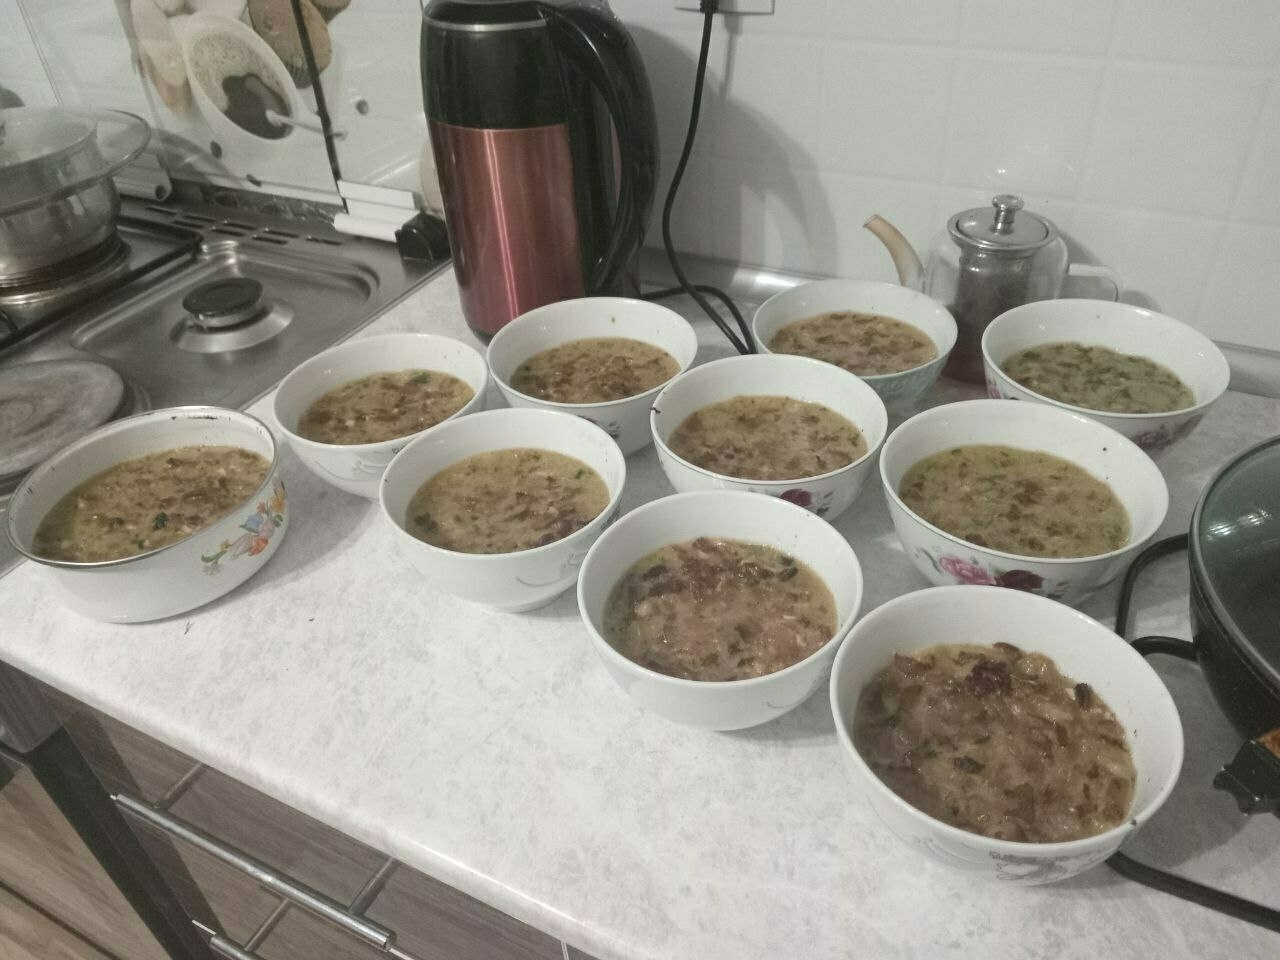 9 soup bowl and one small, circular tin all filled with fat jelly and some ingredients in it (meat and onions maybe)